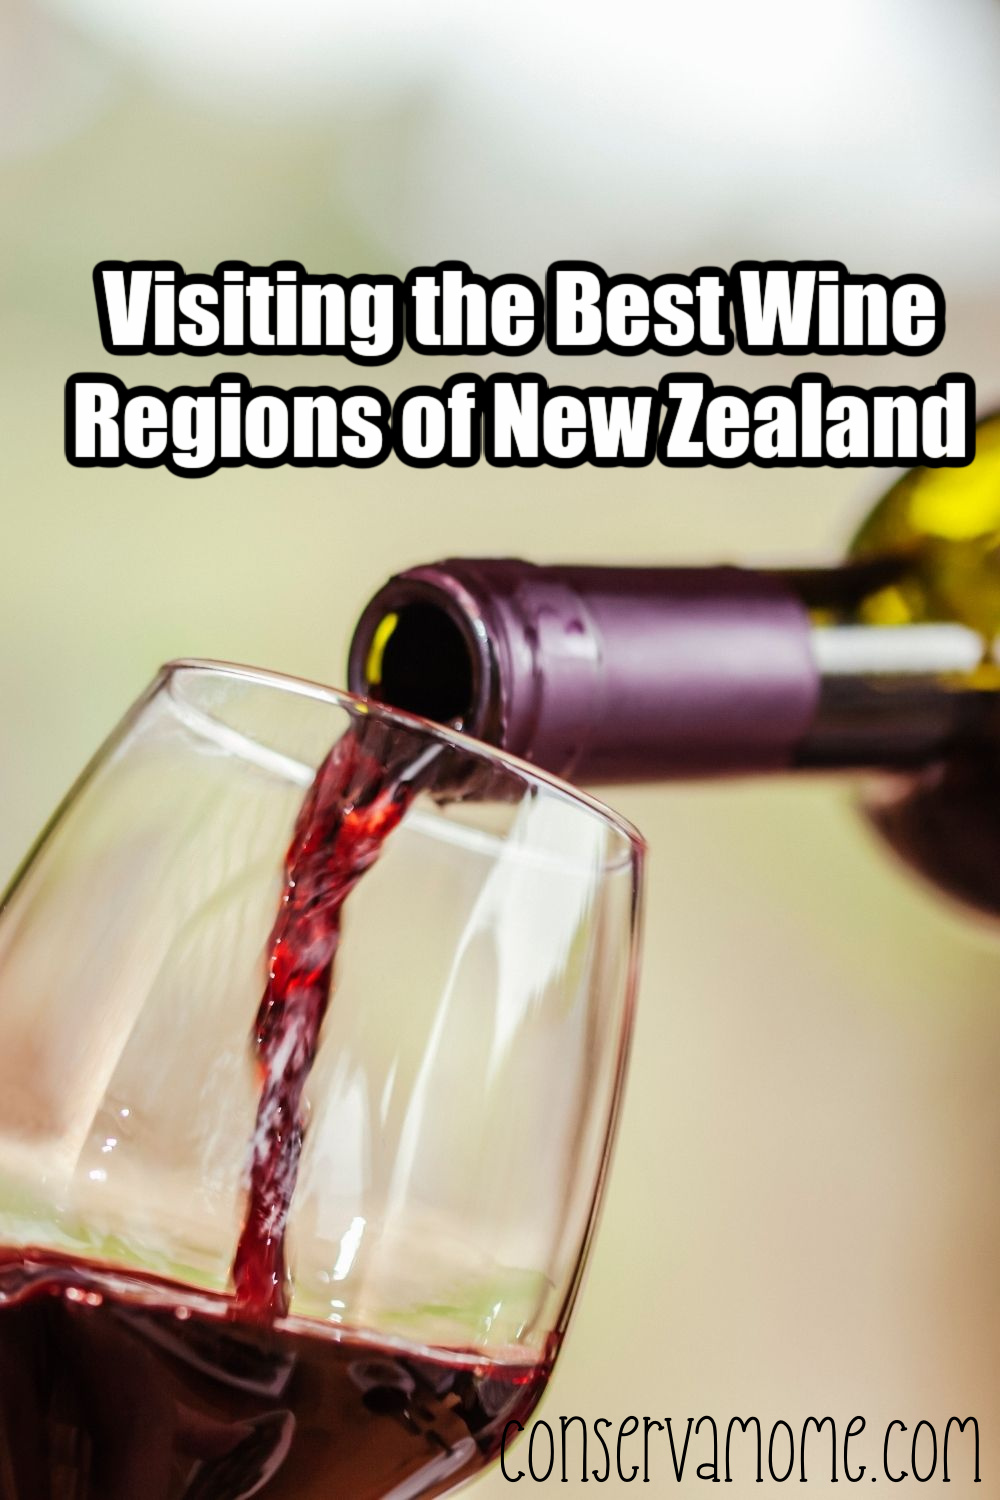 Visiting the Best Wine Regions of New Zealand